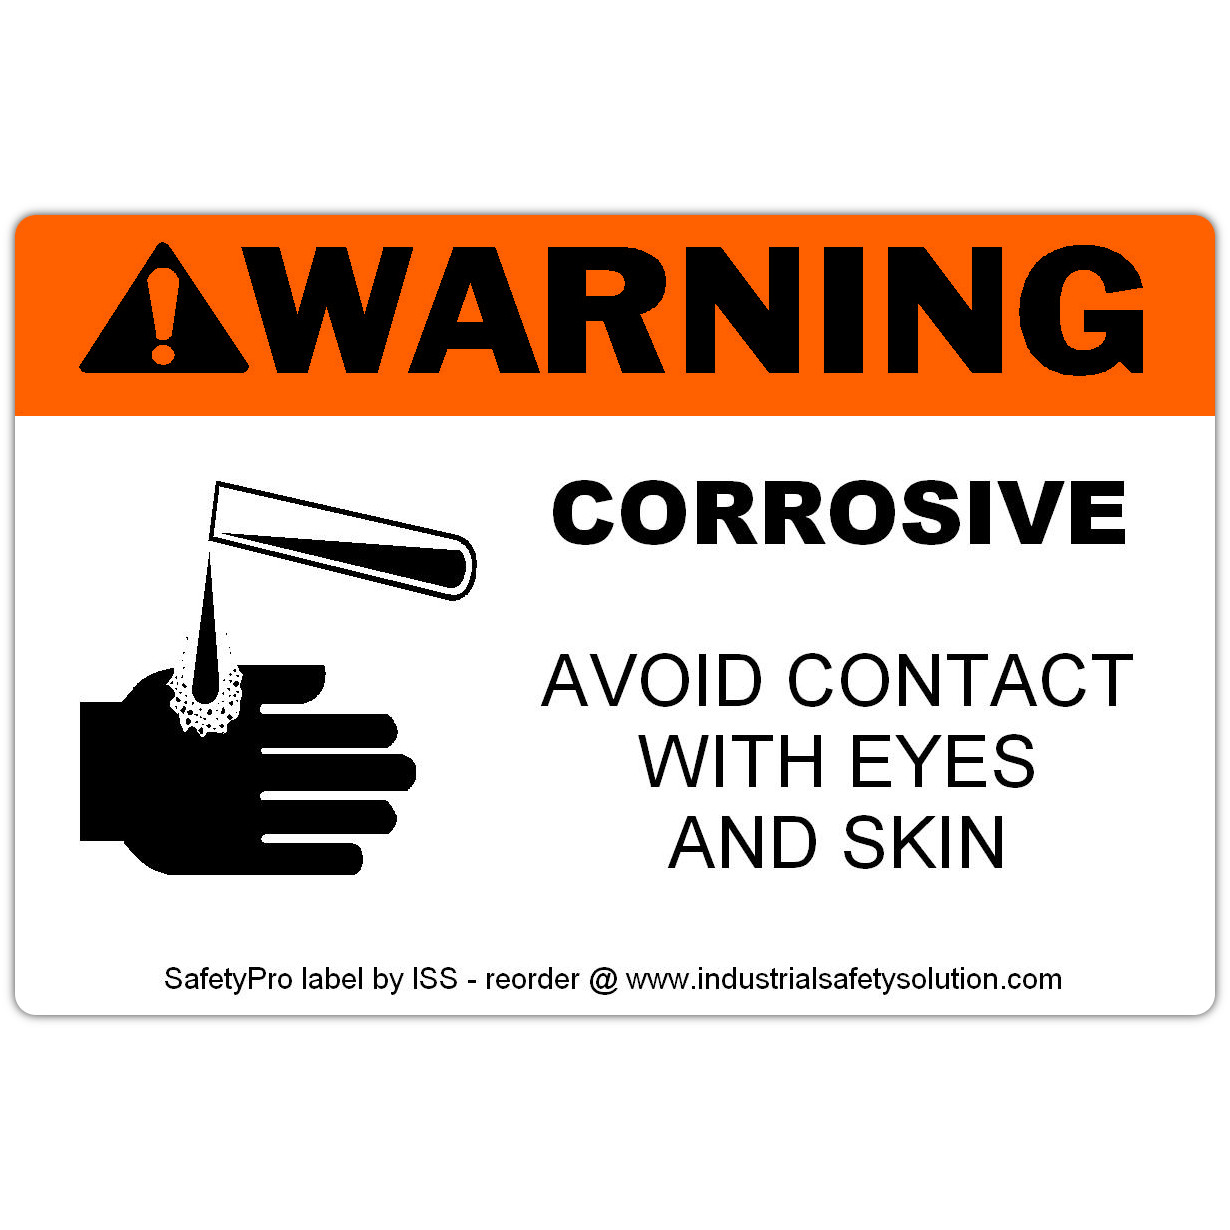 Detail view for 4" x 6" WARNING Corrosive Safety Label